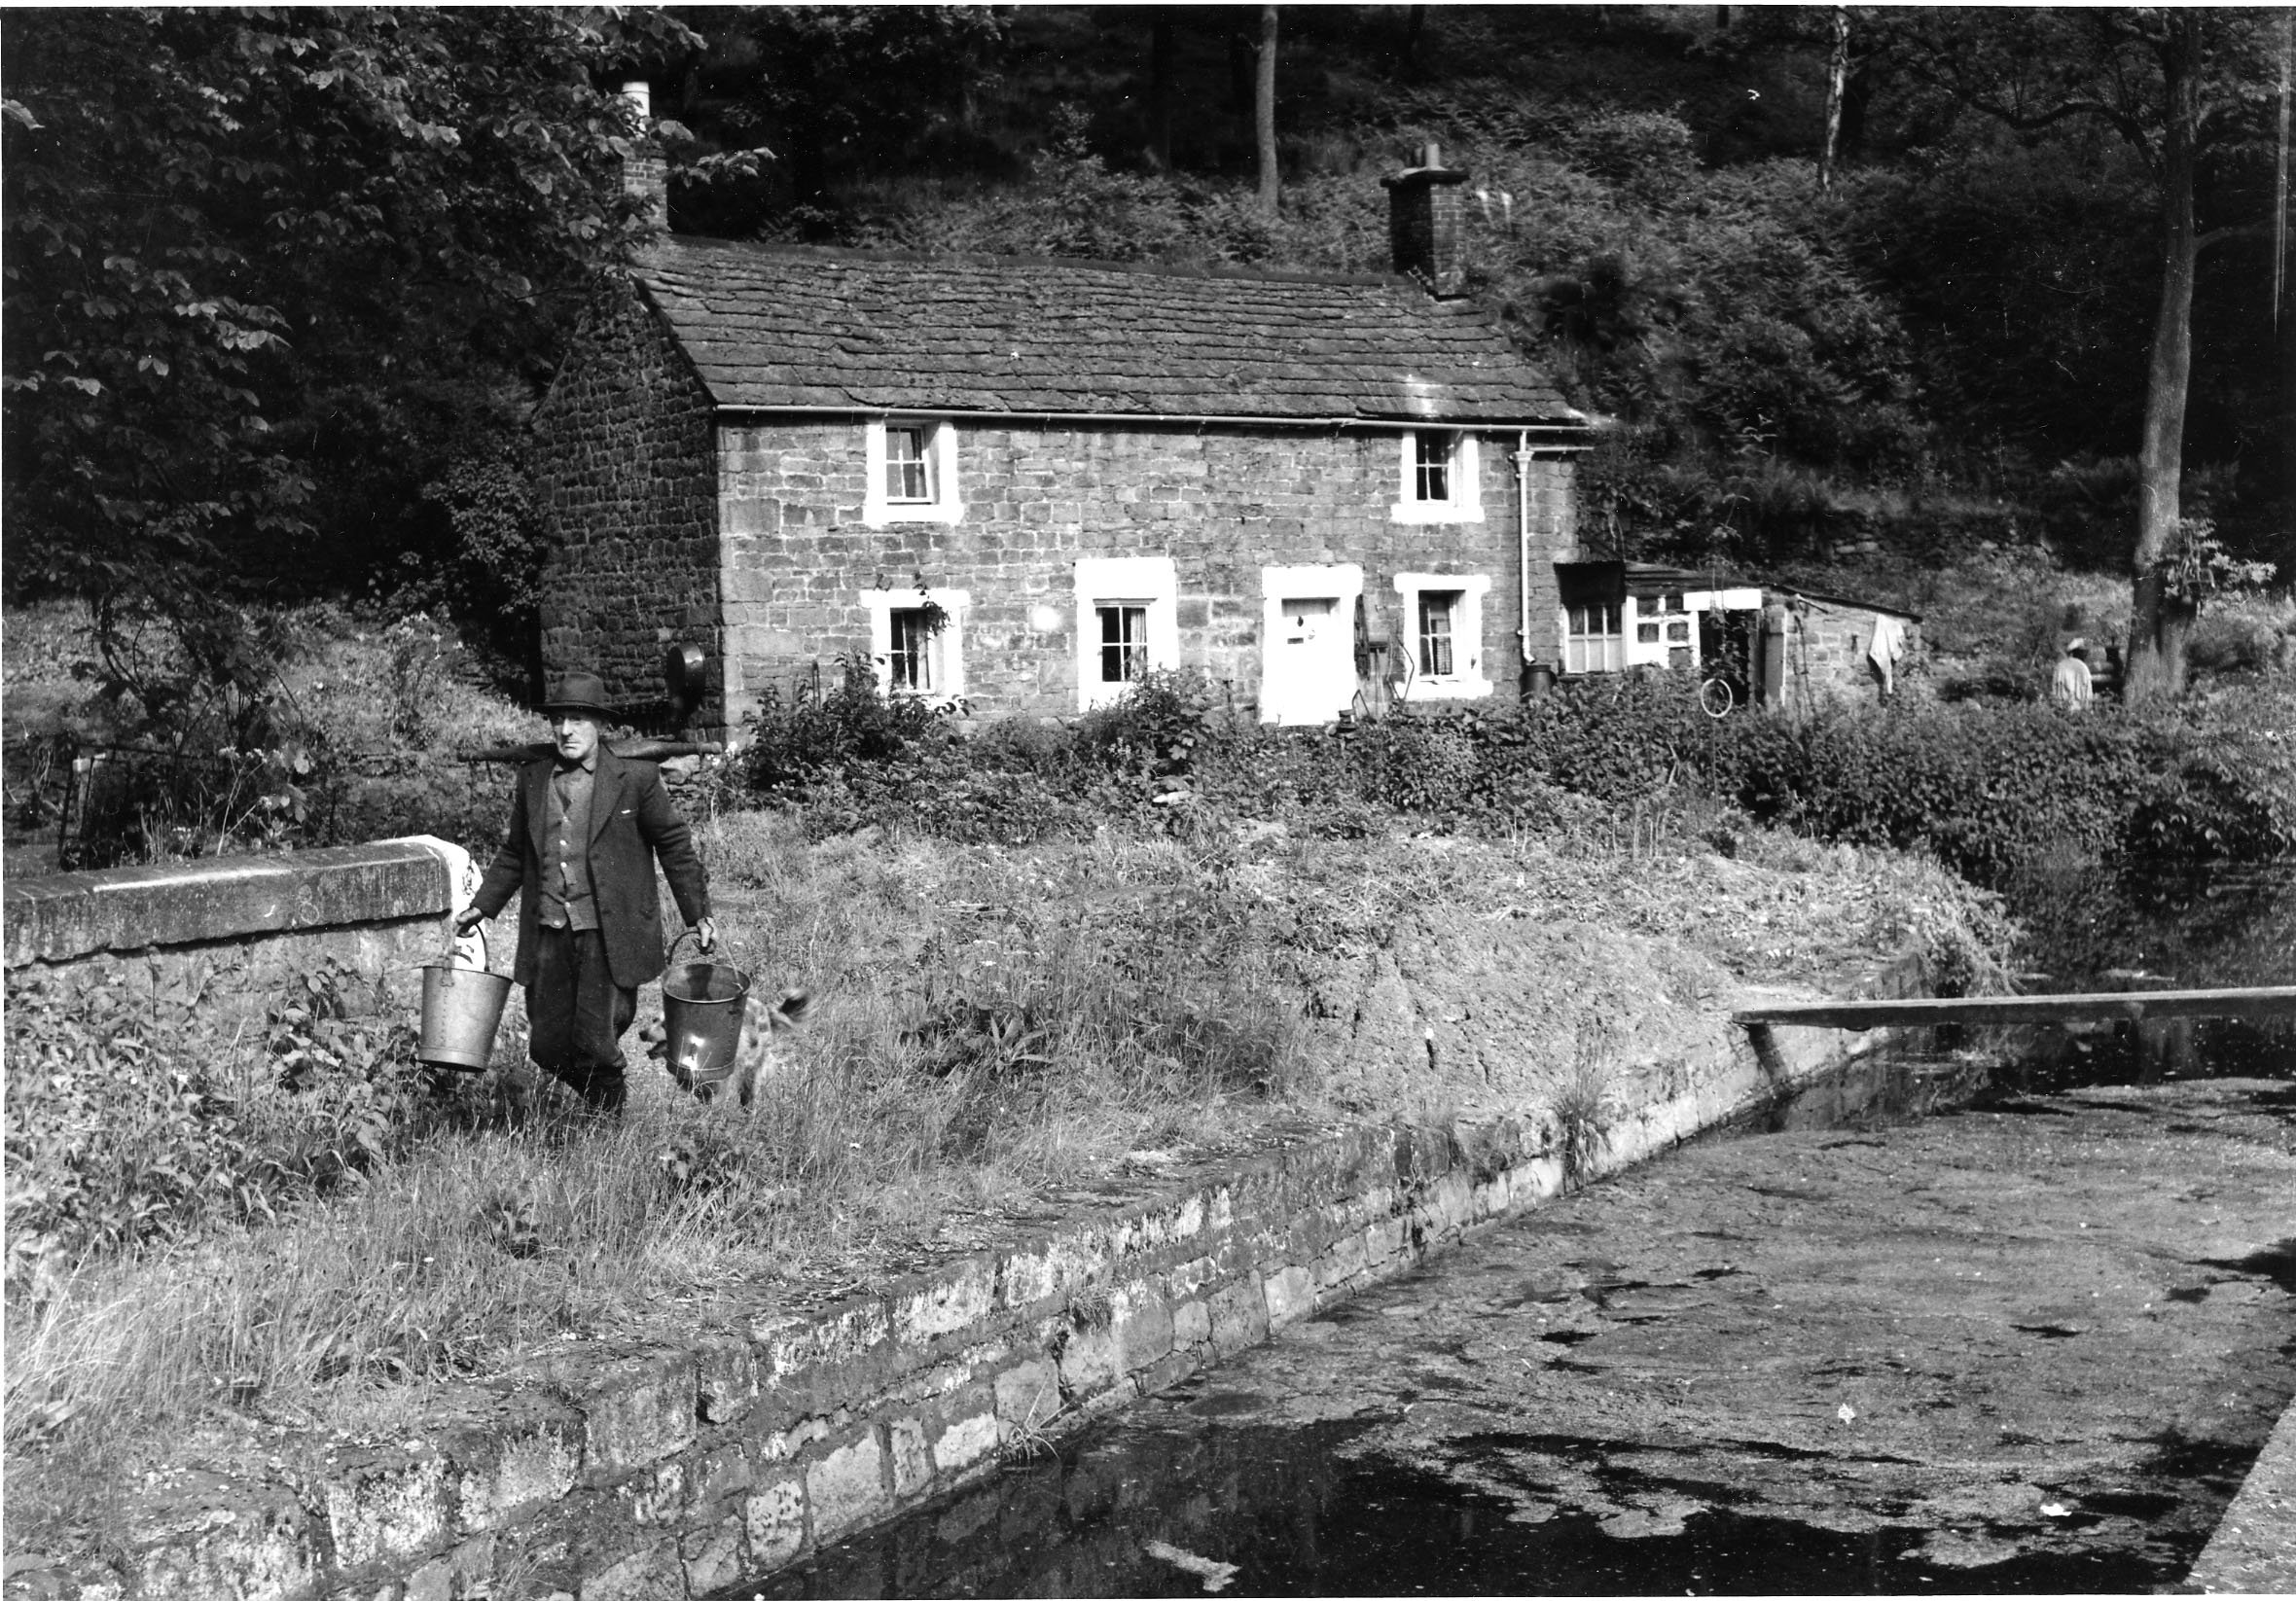 Raising awareness of the much-loved Aqueduct Cottage ruin on the Cromford Canal, near Matlock, and raising support for it to be saved and re-purposed.